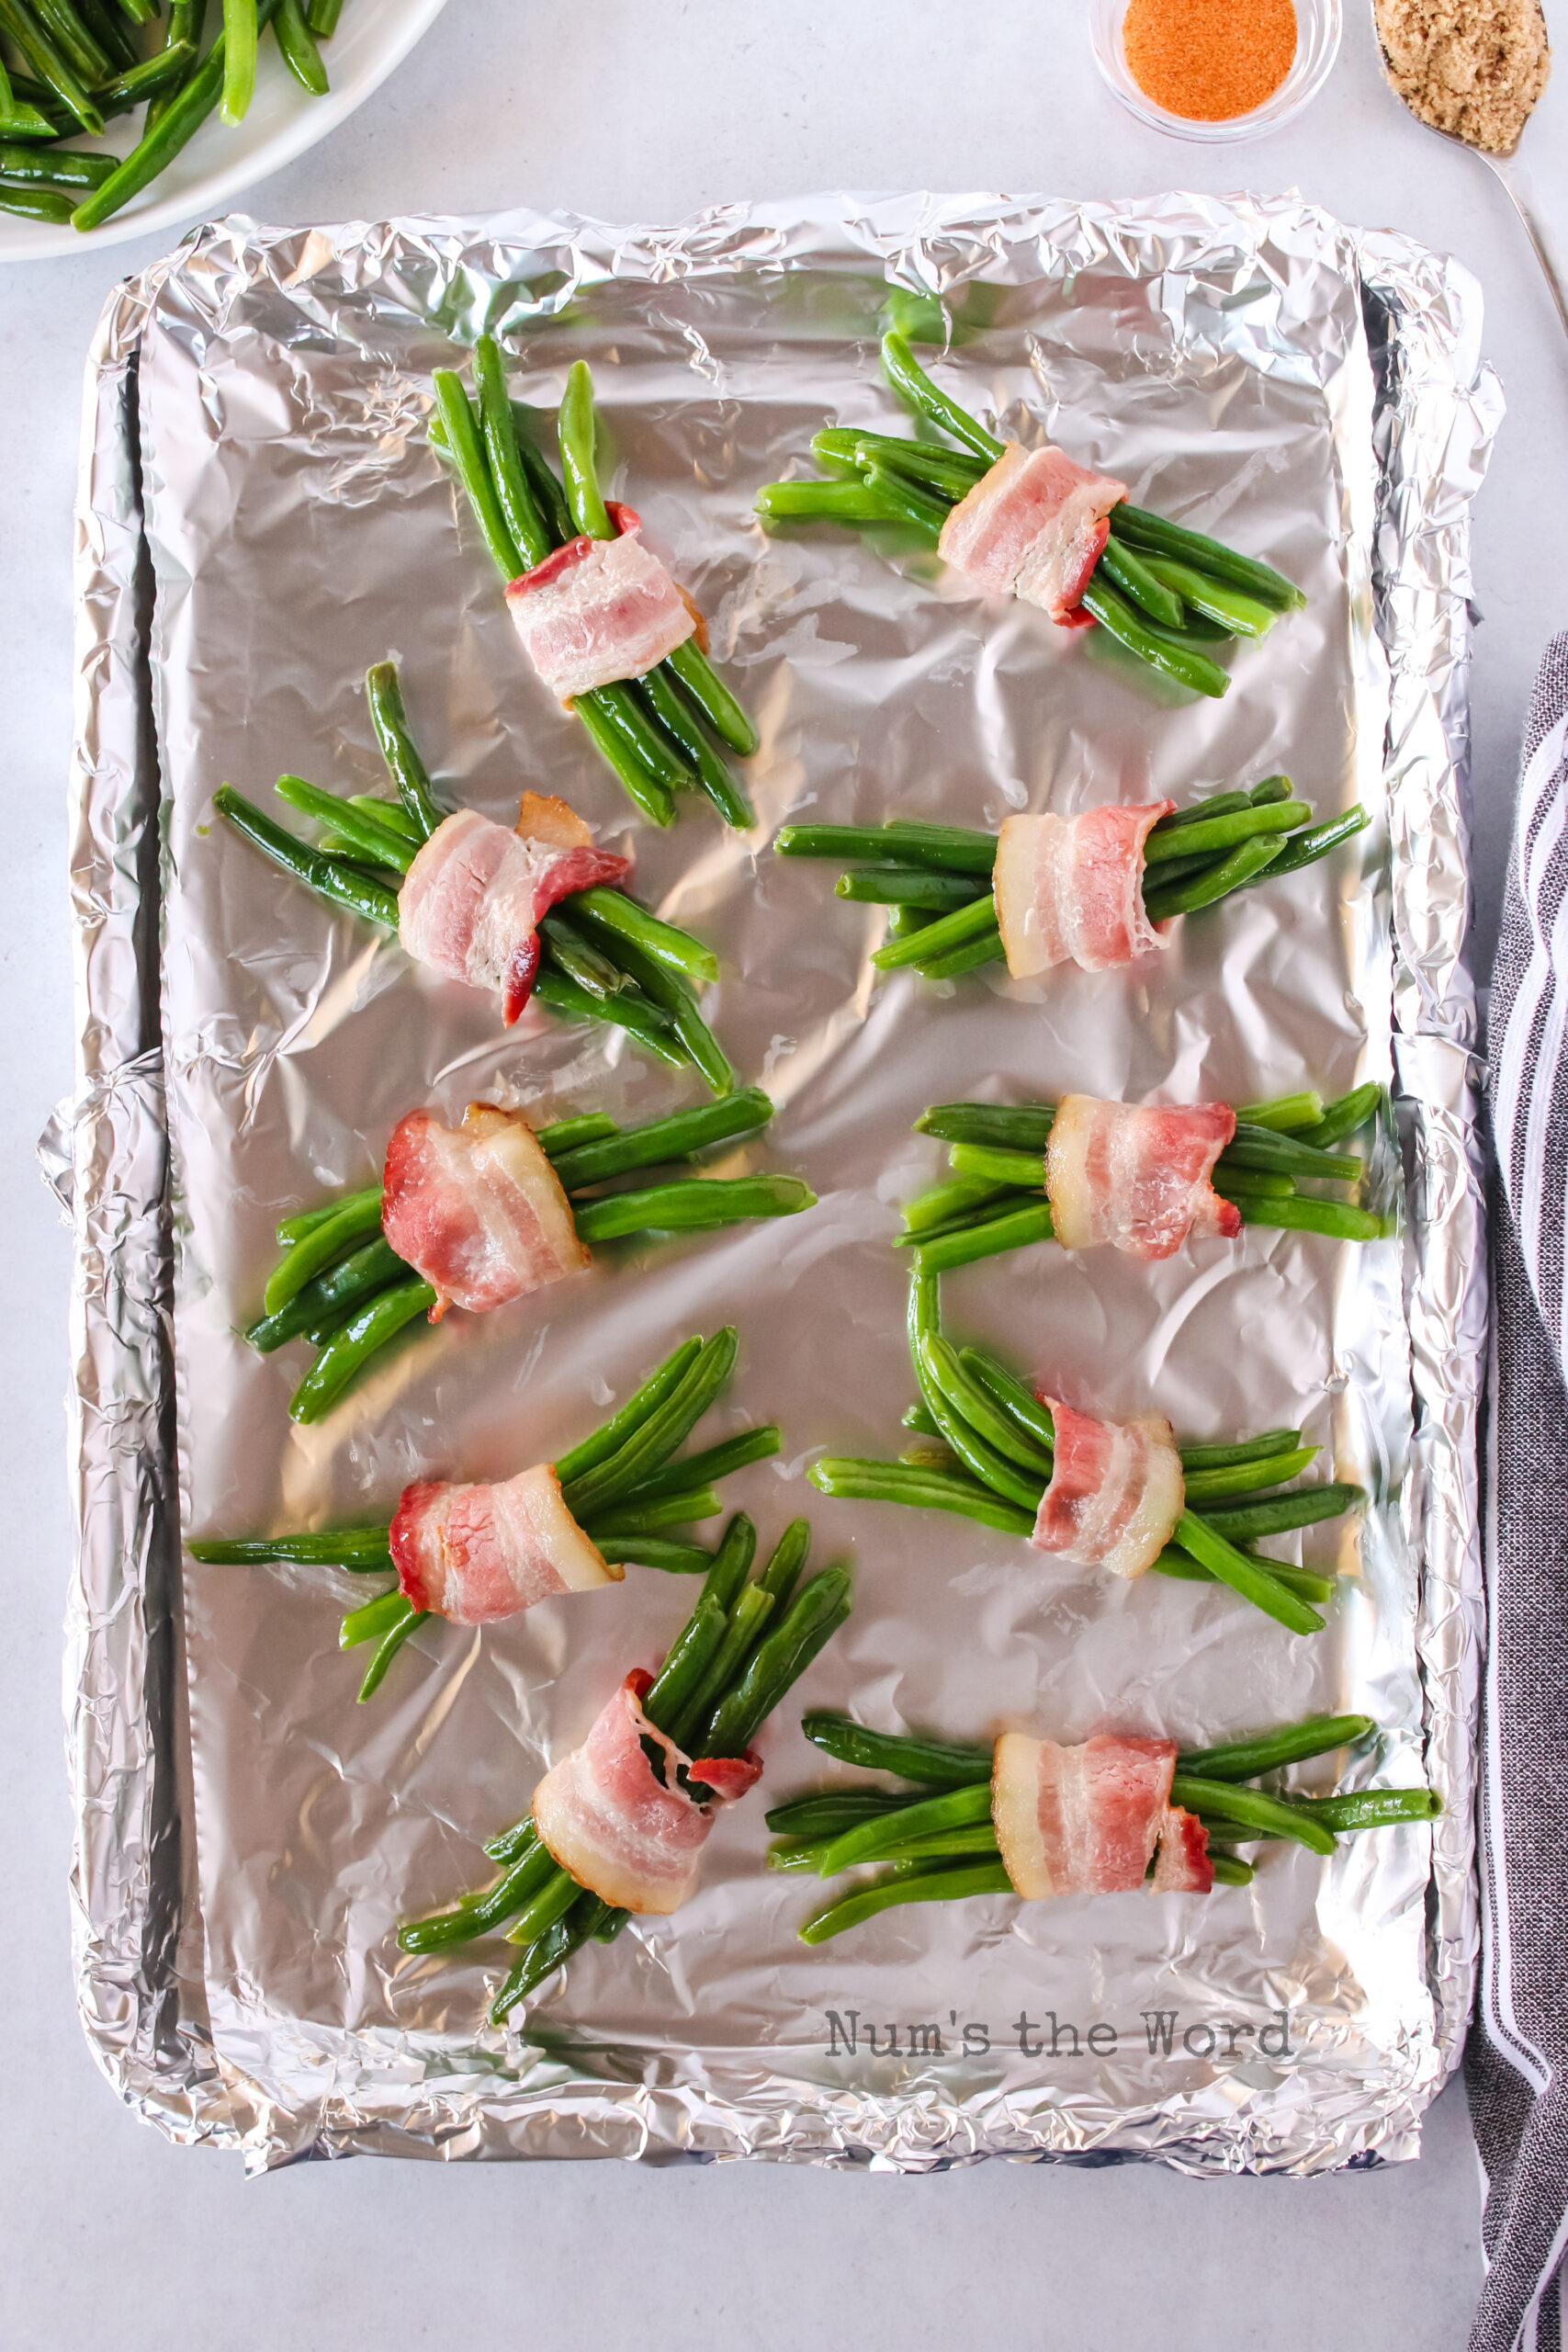 several green beans wrapped in bacon